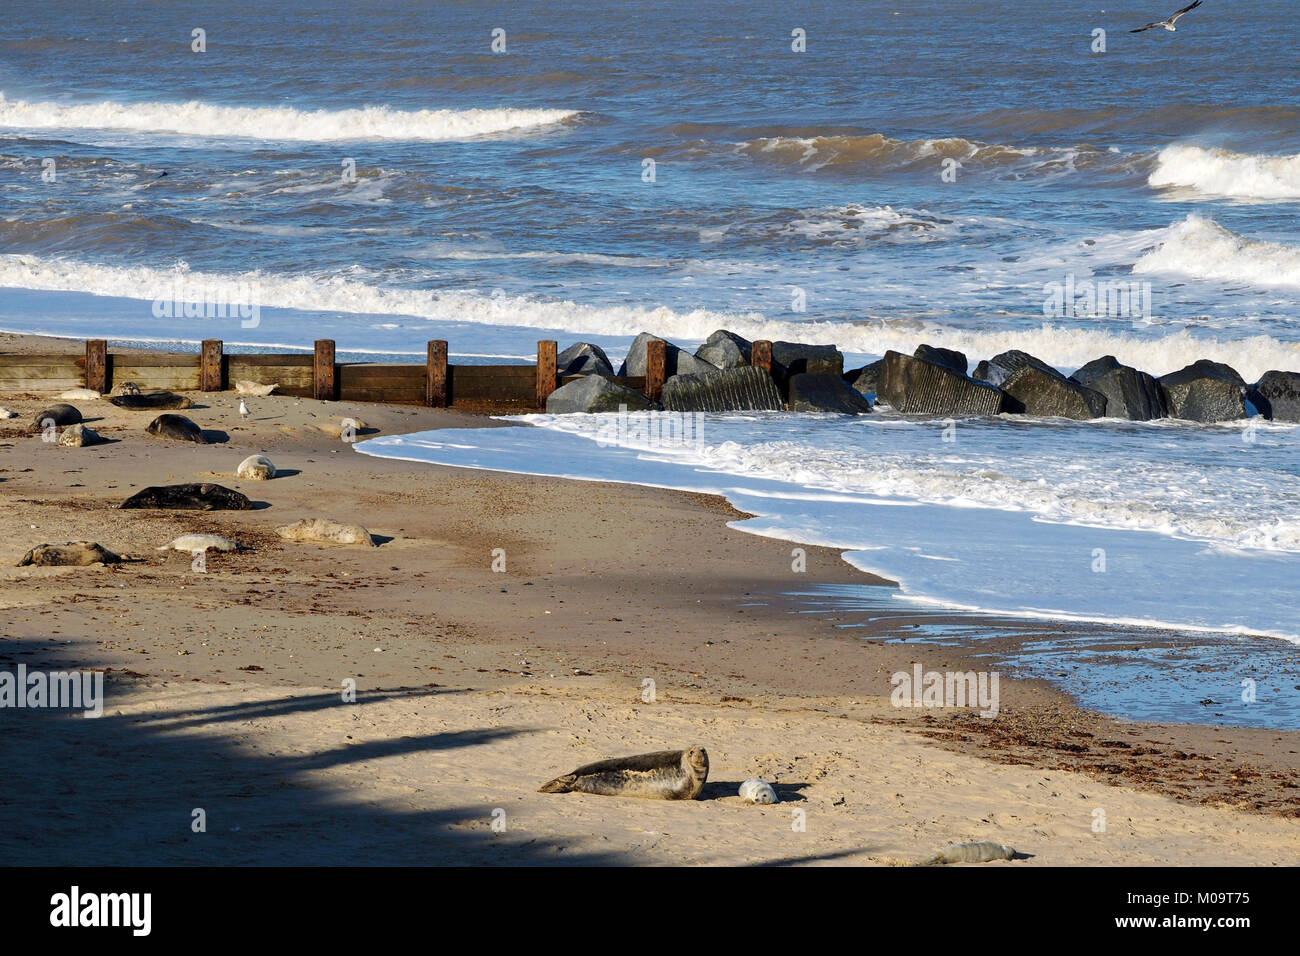 Grey seals and grey seal pups on the beach at Horsey in Norfolk, November 2018. Horsey Beach is one of the main seal rookeries on the east coast. Stock Photo